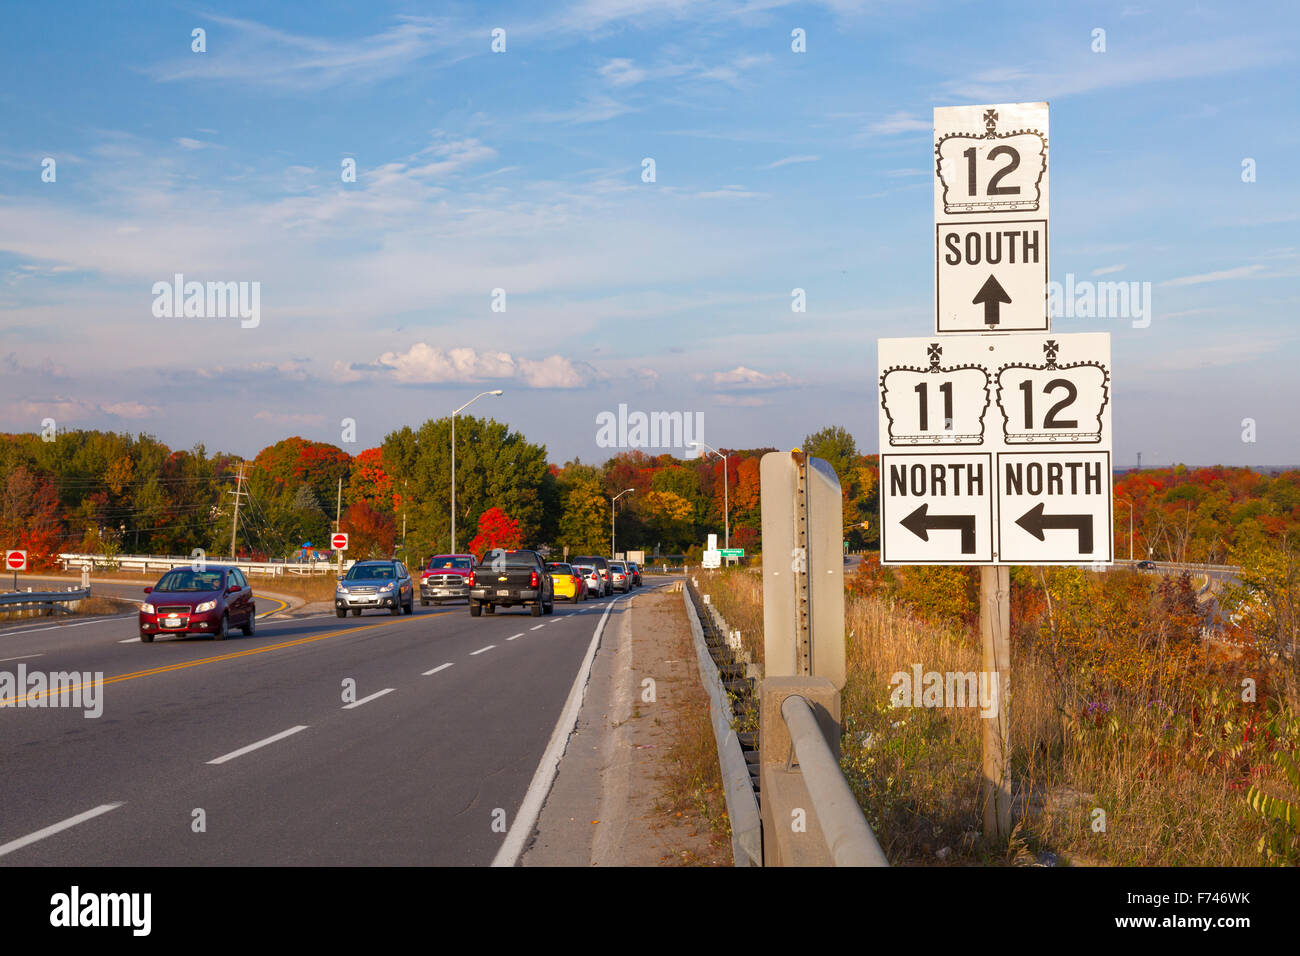 Road signs pointing to Highway 12 and Highway 11 on the side of a busy highway. Orillia, Ontario, Canada. Stock Photo